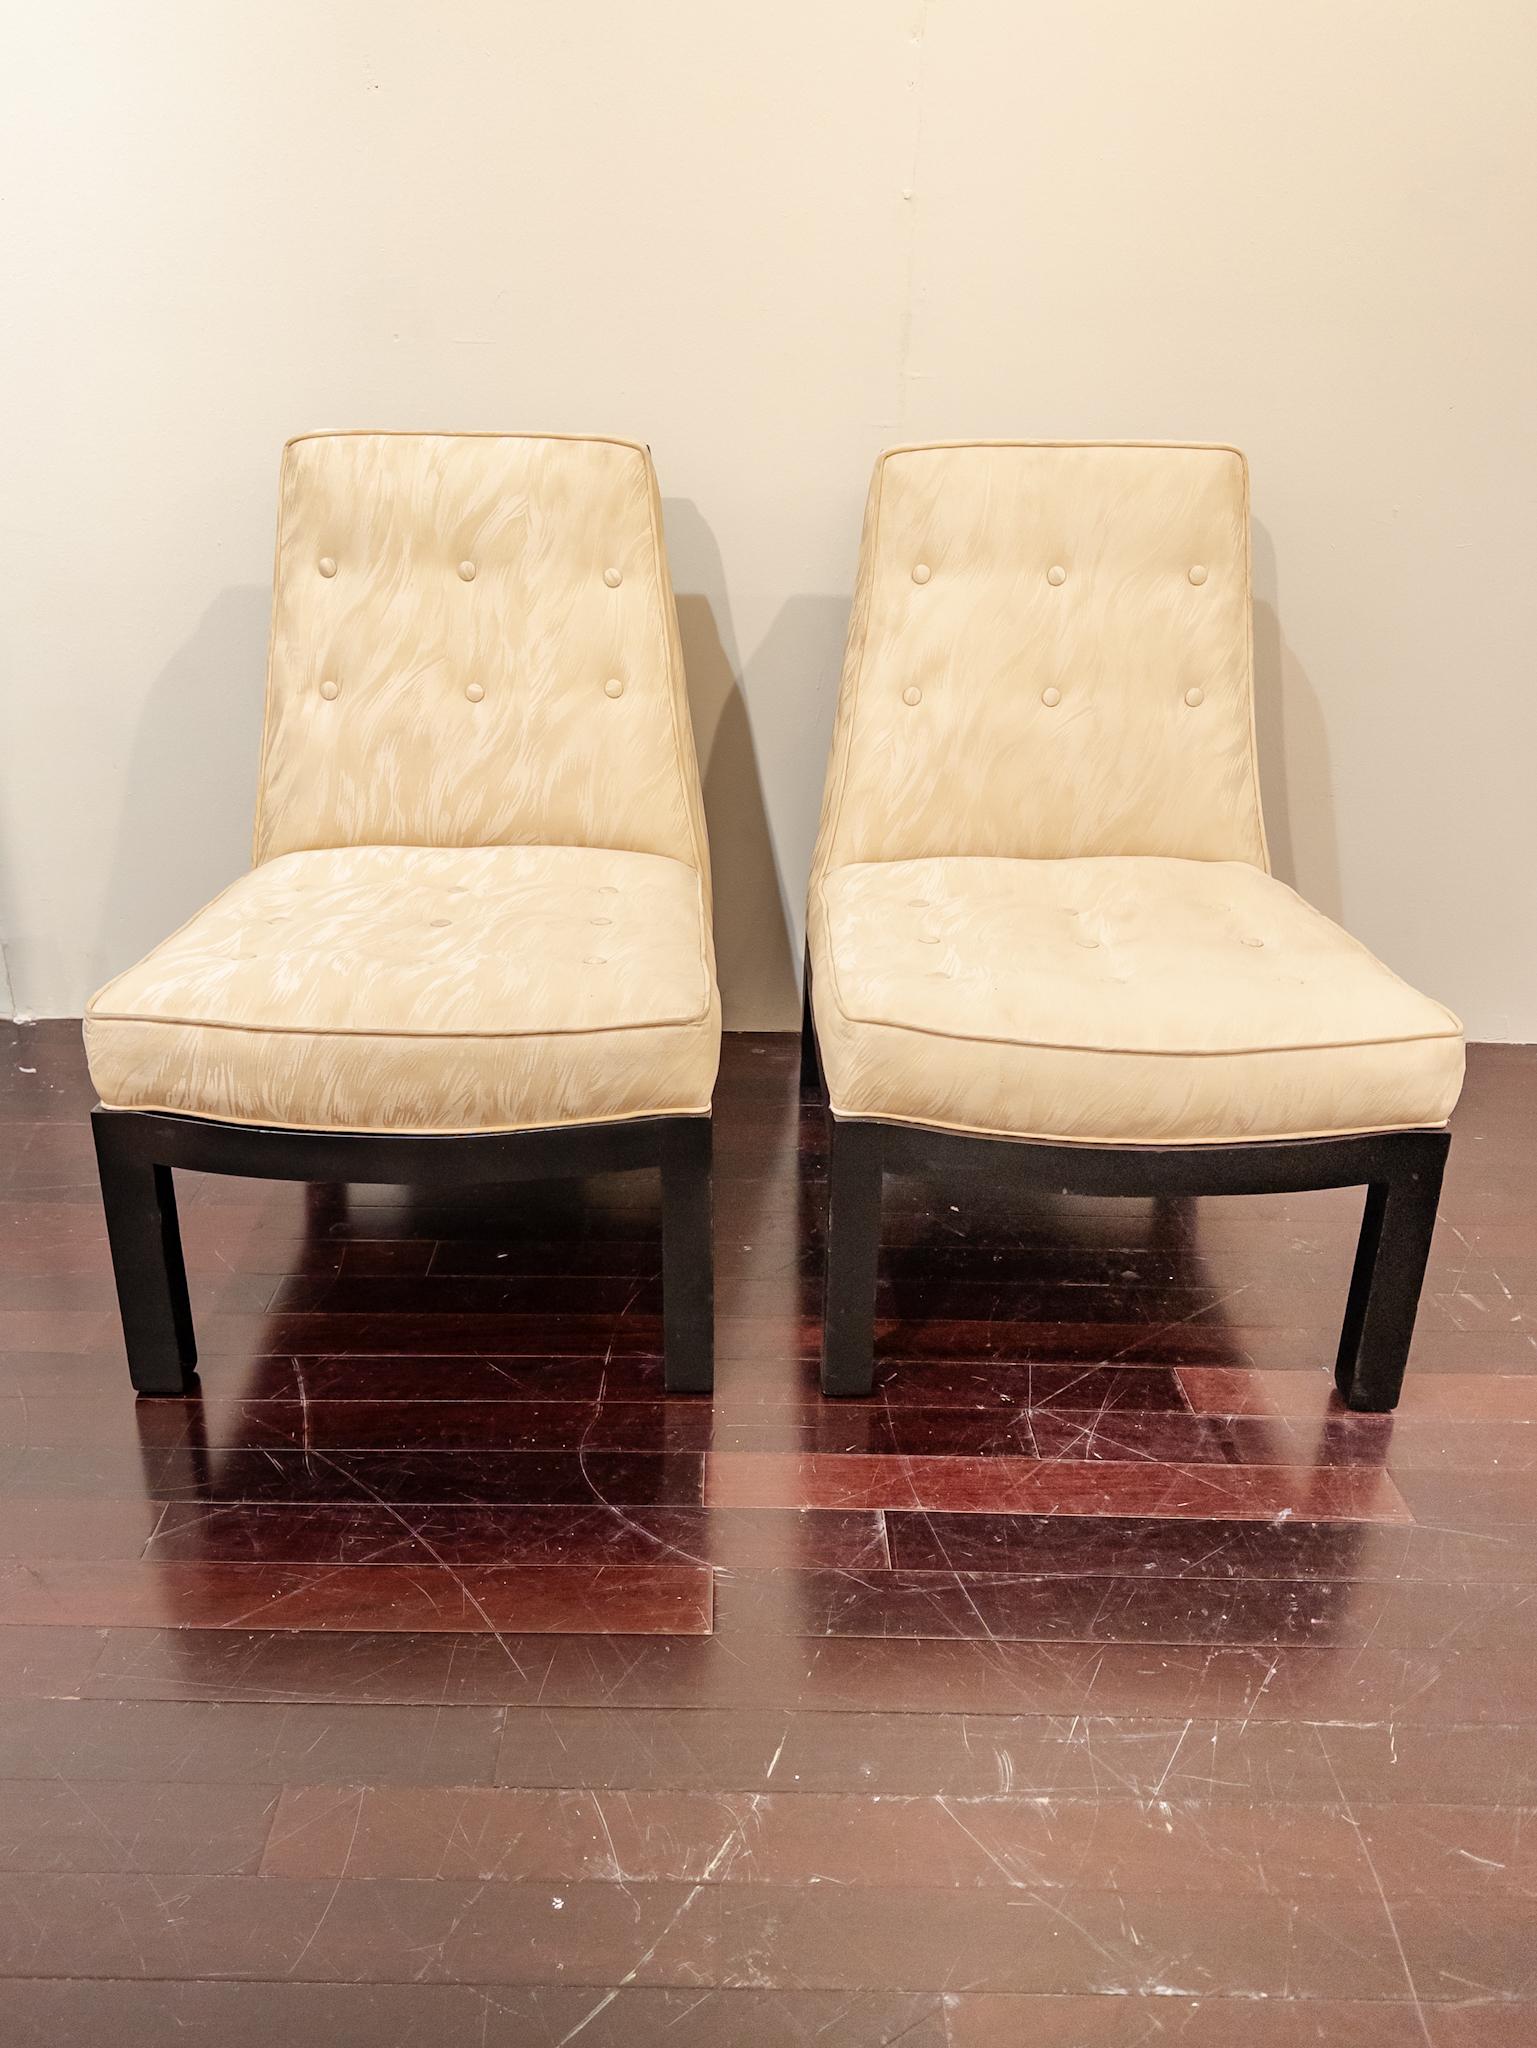 This pair of Screen Back Slipper Chairs, reminiscent of the iconic designs by Edward Wormley and James Mont, embodies a perfect fusion of sophistication and functionality. Crafted from ebonized mahogany, they exude a timeless allure with their sleek